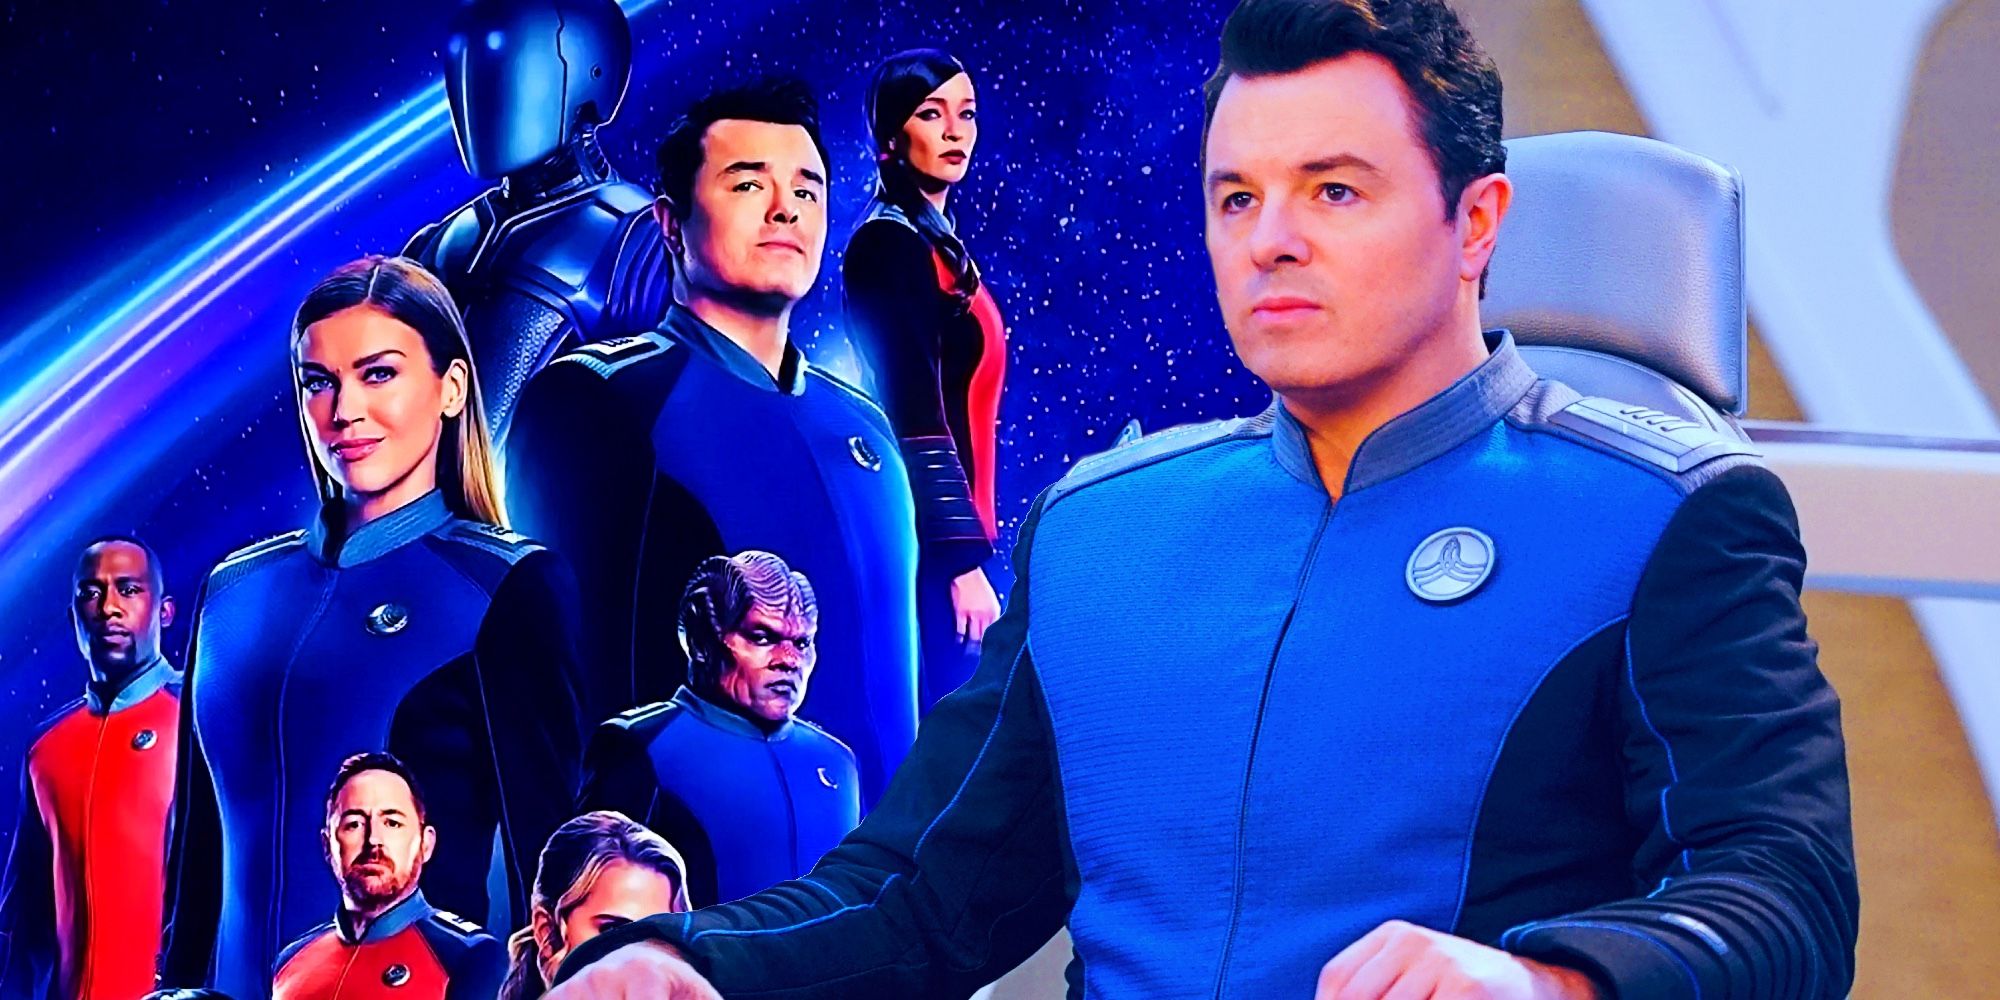 seth mcfarlane and the cast of the orville in the orville season 3 and poster